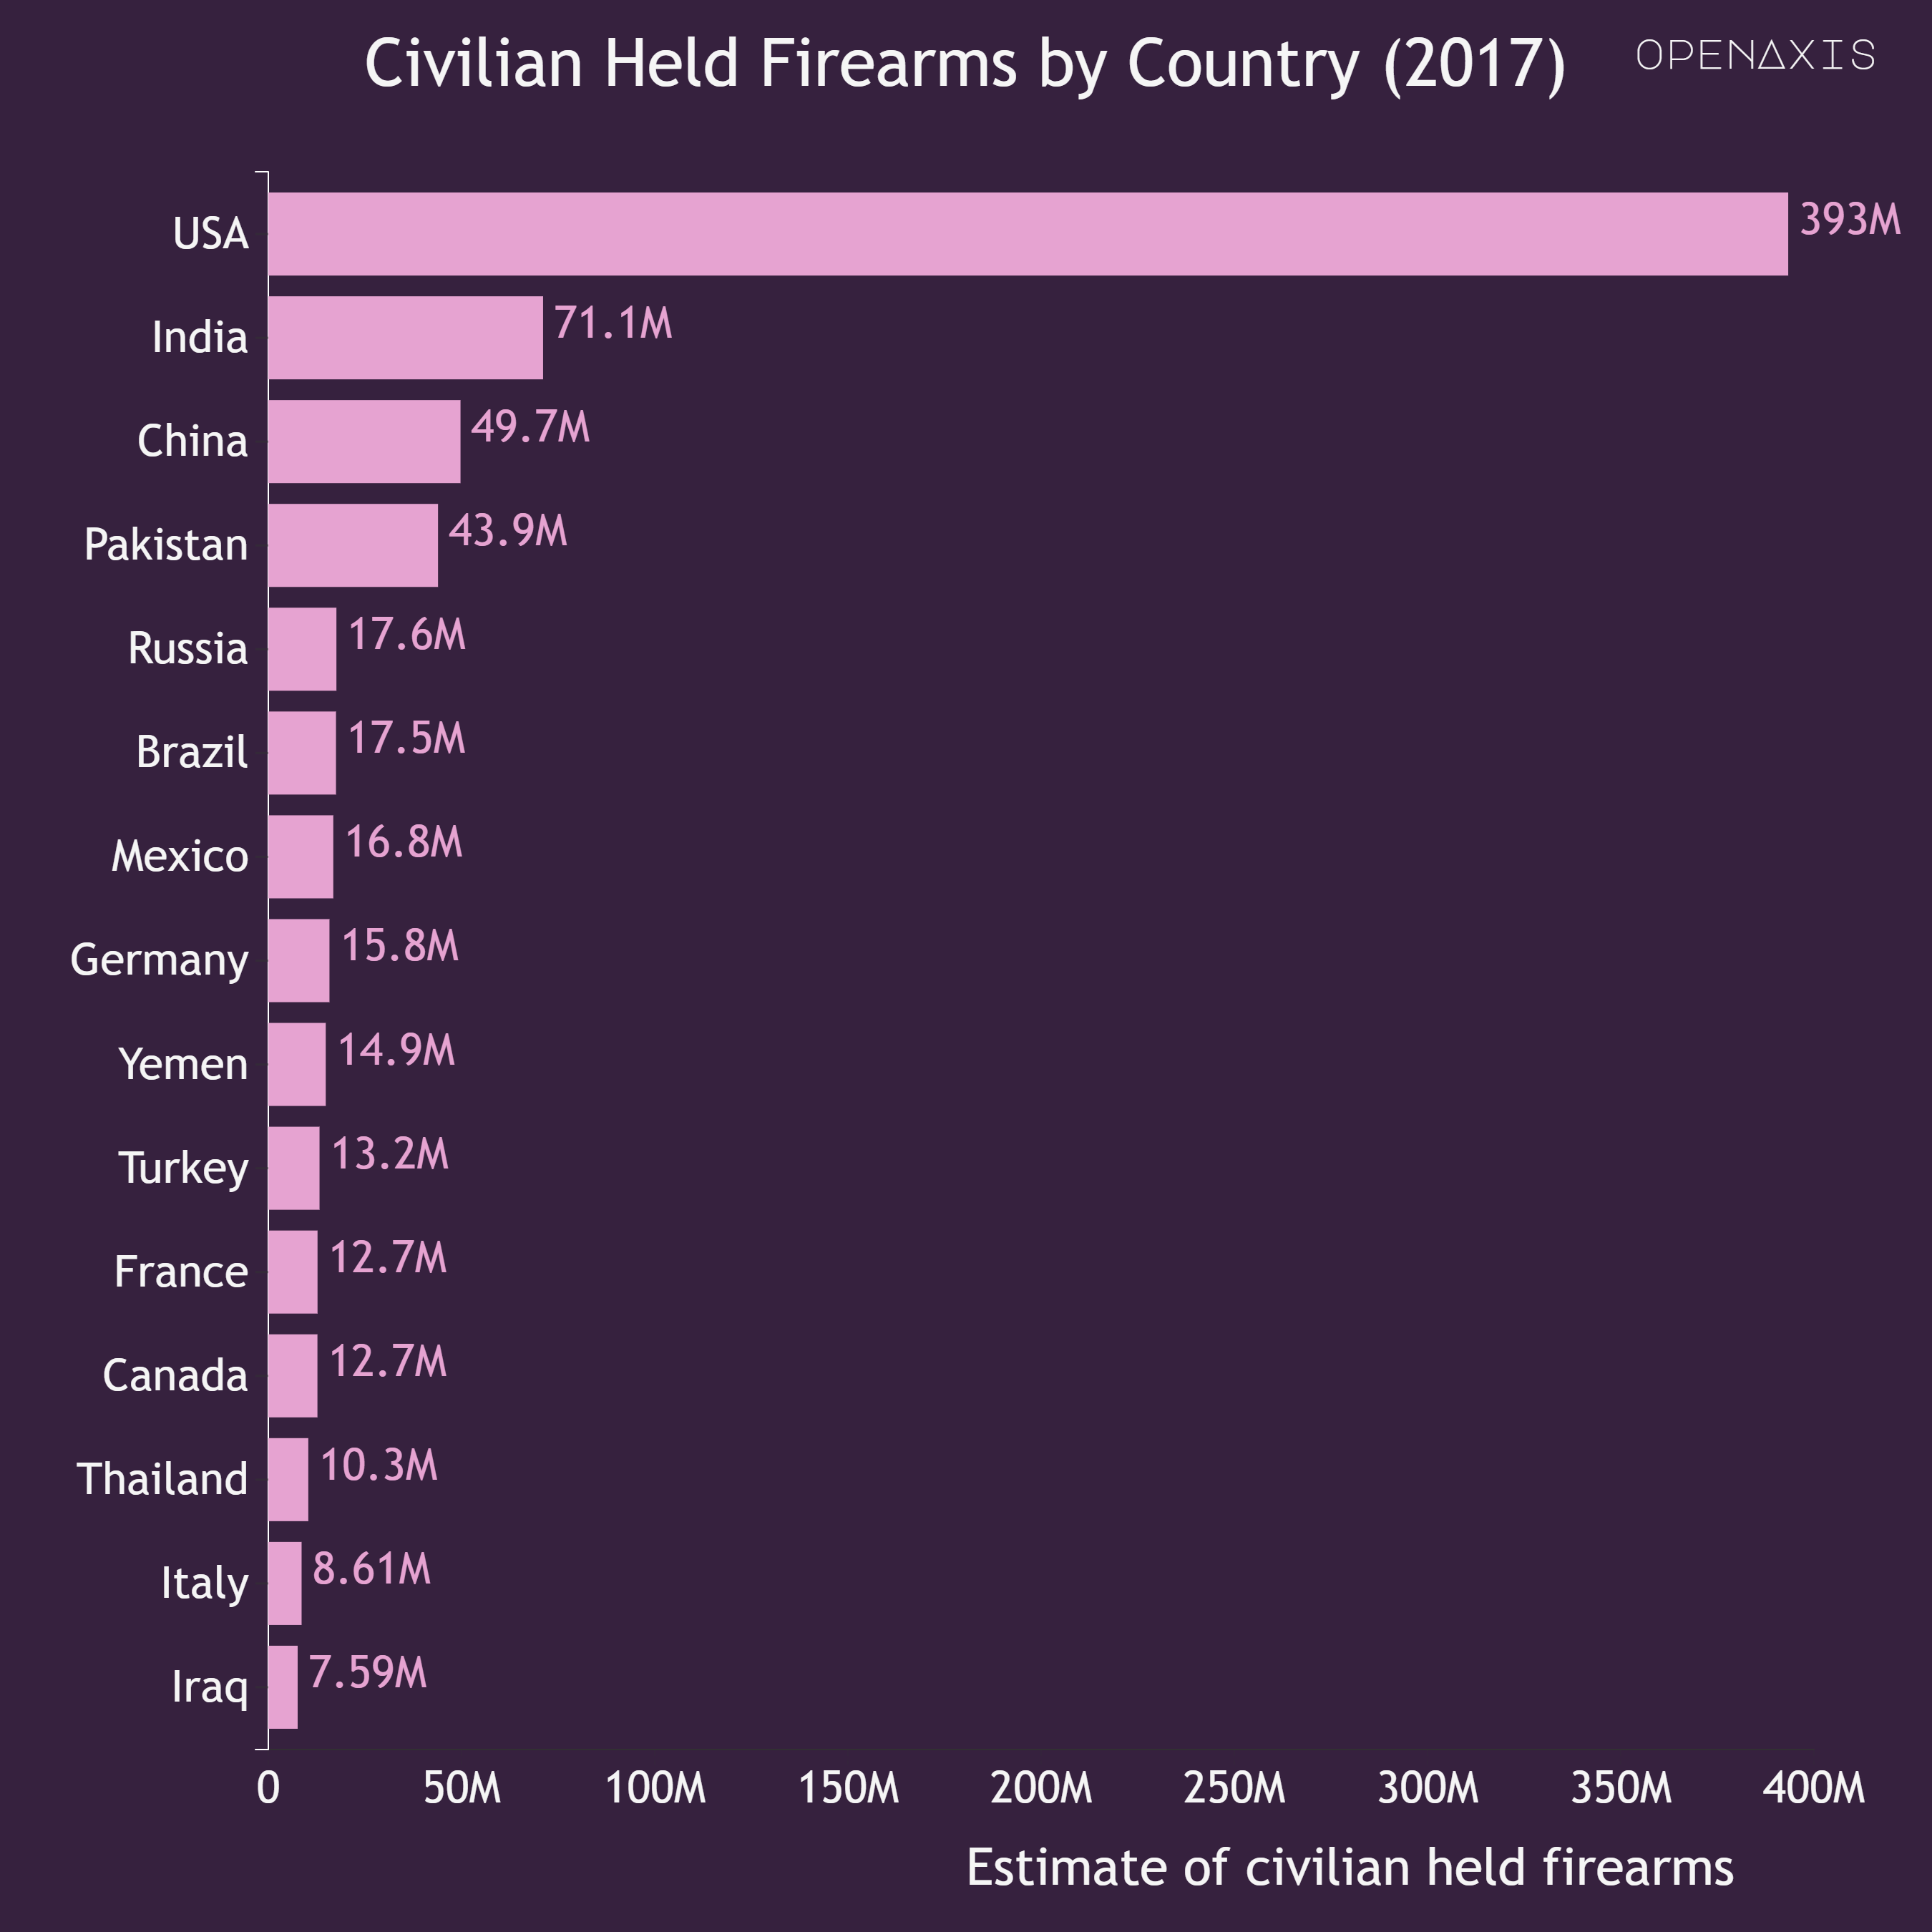 <p>In 2018, Small Arms Survey reported that there are over one billion small arms distributed globally, of which 857 million (about 85 percent) are in civilian hands.</p><p><br /></p><p>U.S. civilians alone account for 393 million (about 46 percent) of the worldwide total of civilian held firearms. This amounts to "120.5 firearms for every 100 residents."</p><p><br /></p><p>According to the report, the world's armed forces control about 133 million (about 13 percent) of the global total of small arms, of which over 43 percent belong to two countries: the Russian Federation (30.3 million) and China (27.5 million). And, the world's law enforcement agencies control about 23 million (about 2 percent) of the global total of small arms.</p><p><br /></p><p><span data-index="0" data-denotation-char data-id="0" data-value="&lt;a href=&quot;/search?q=%23guns&quot; target=_self&gt;#guns" data-link="/search?q=%23guns">﻿<span contenteditable="false"><span></span><a href="/search?q=%23guns" target="_self">#guns</a></span>﻿</span></p><p><br /></p><p>Source: <a href="/data/3908" target="_blank">Small Arms Survey</a></p><p><br /></p>